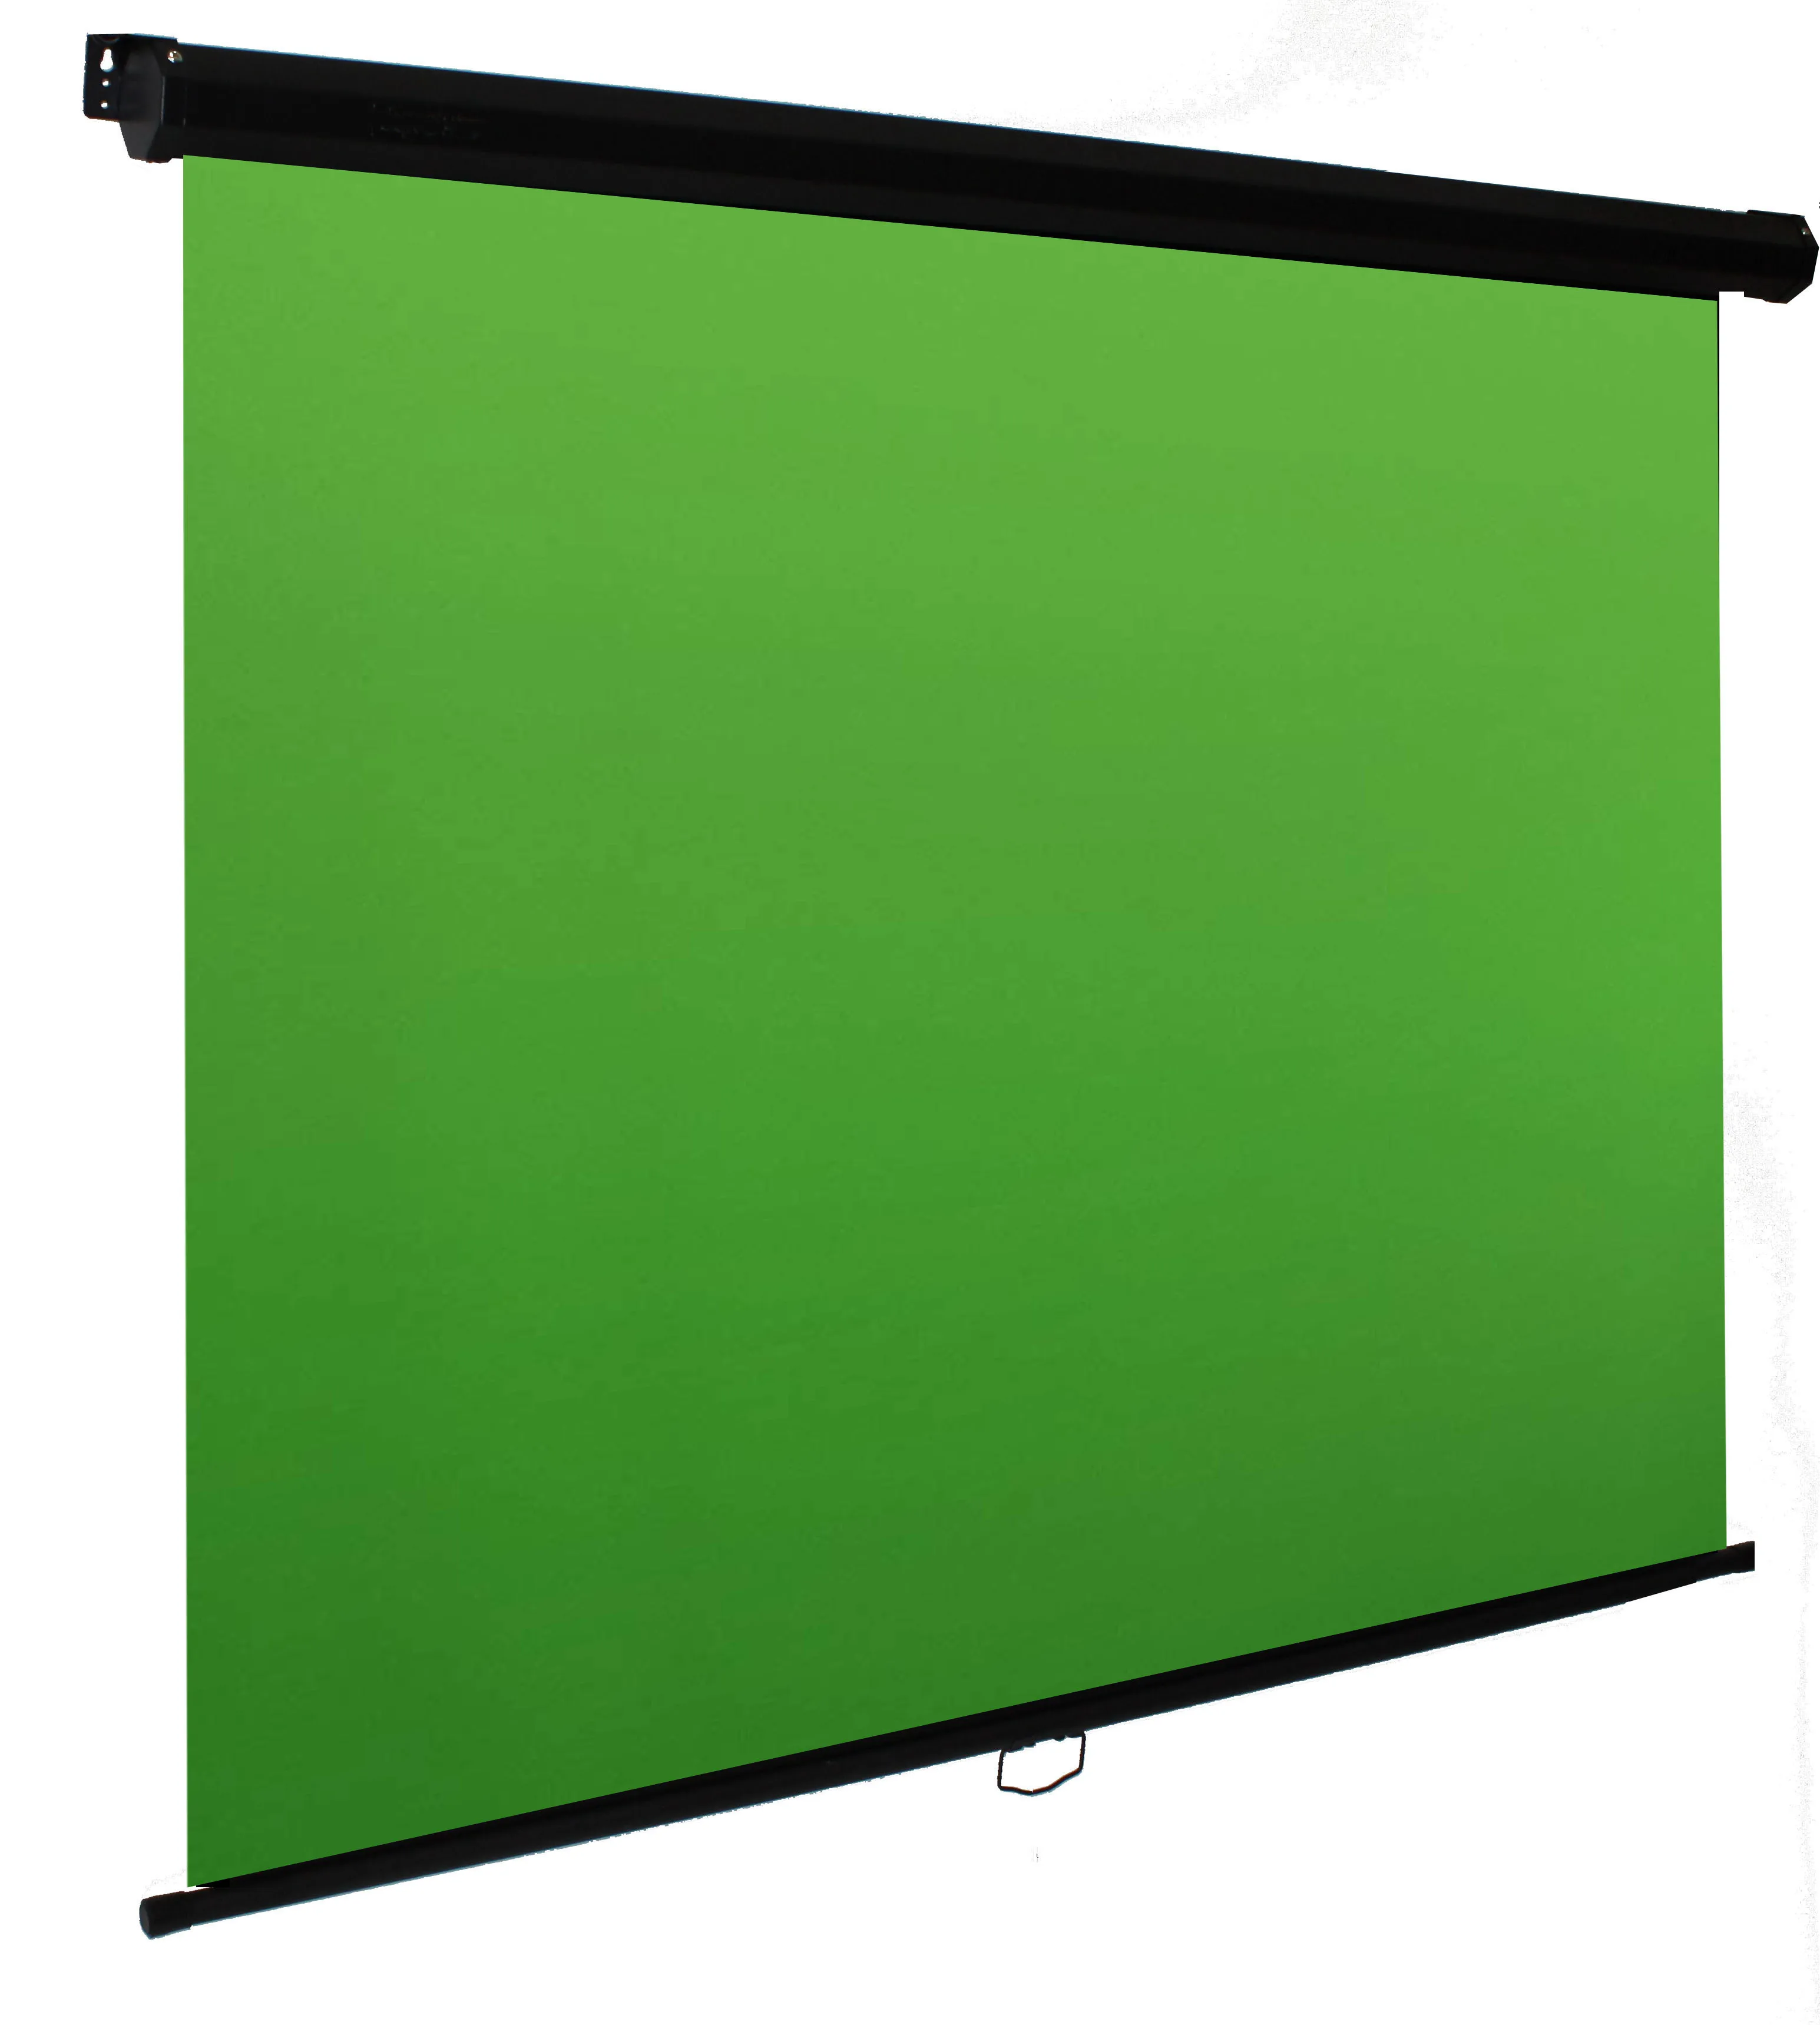 Wall Mount Pull Down Green Screen Studio Background Backdrop Collapsible  180x180cm - Buy Green Screen,Collapsible Chroma Screen,Background Green  Screen Product on 